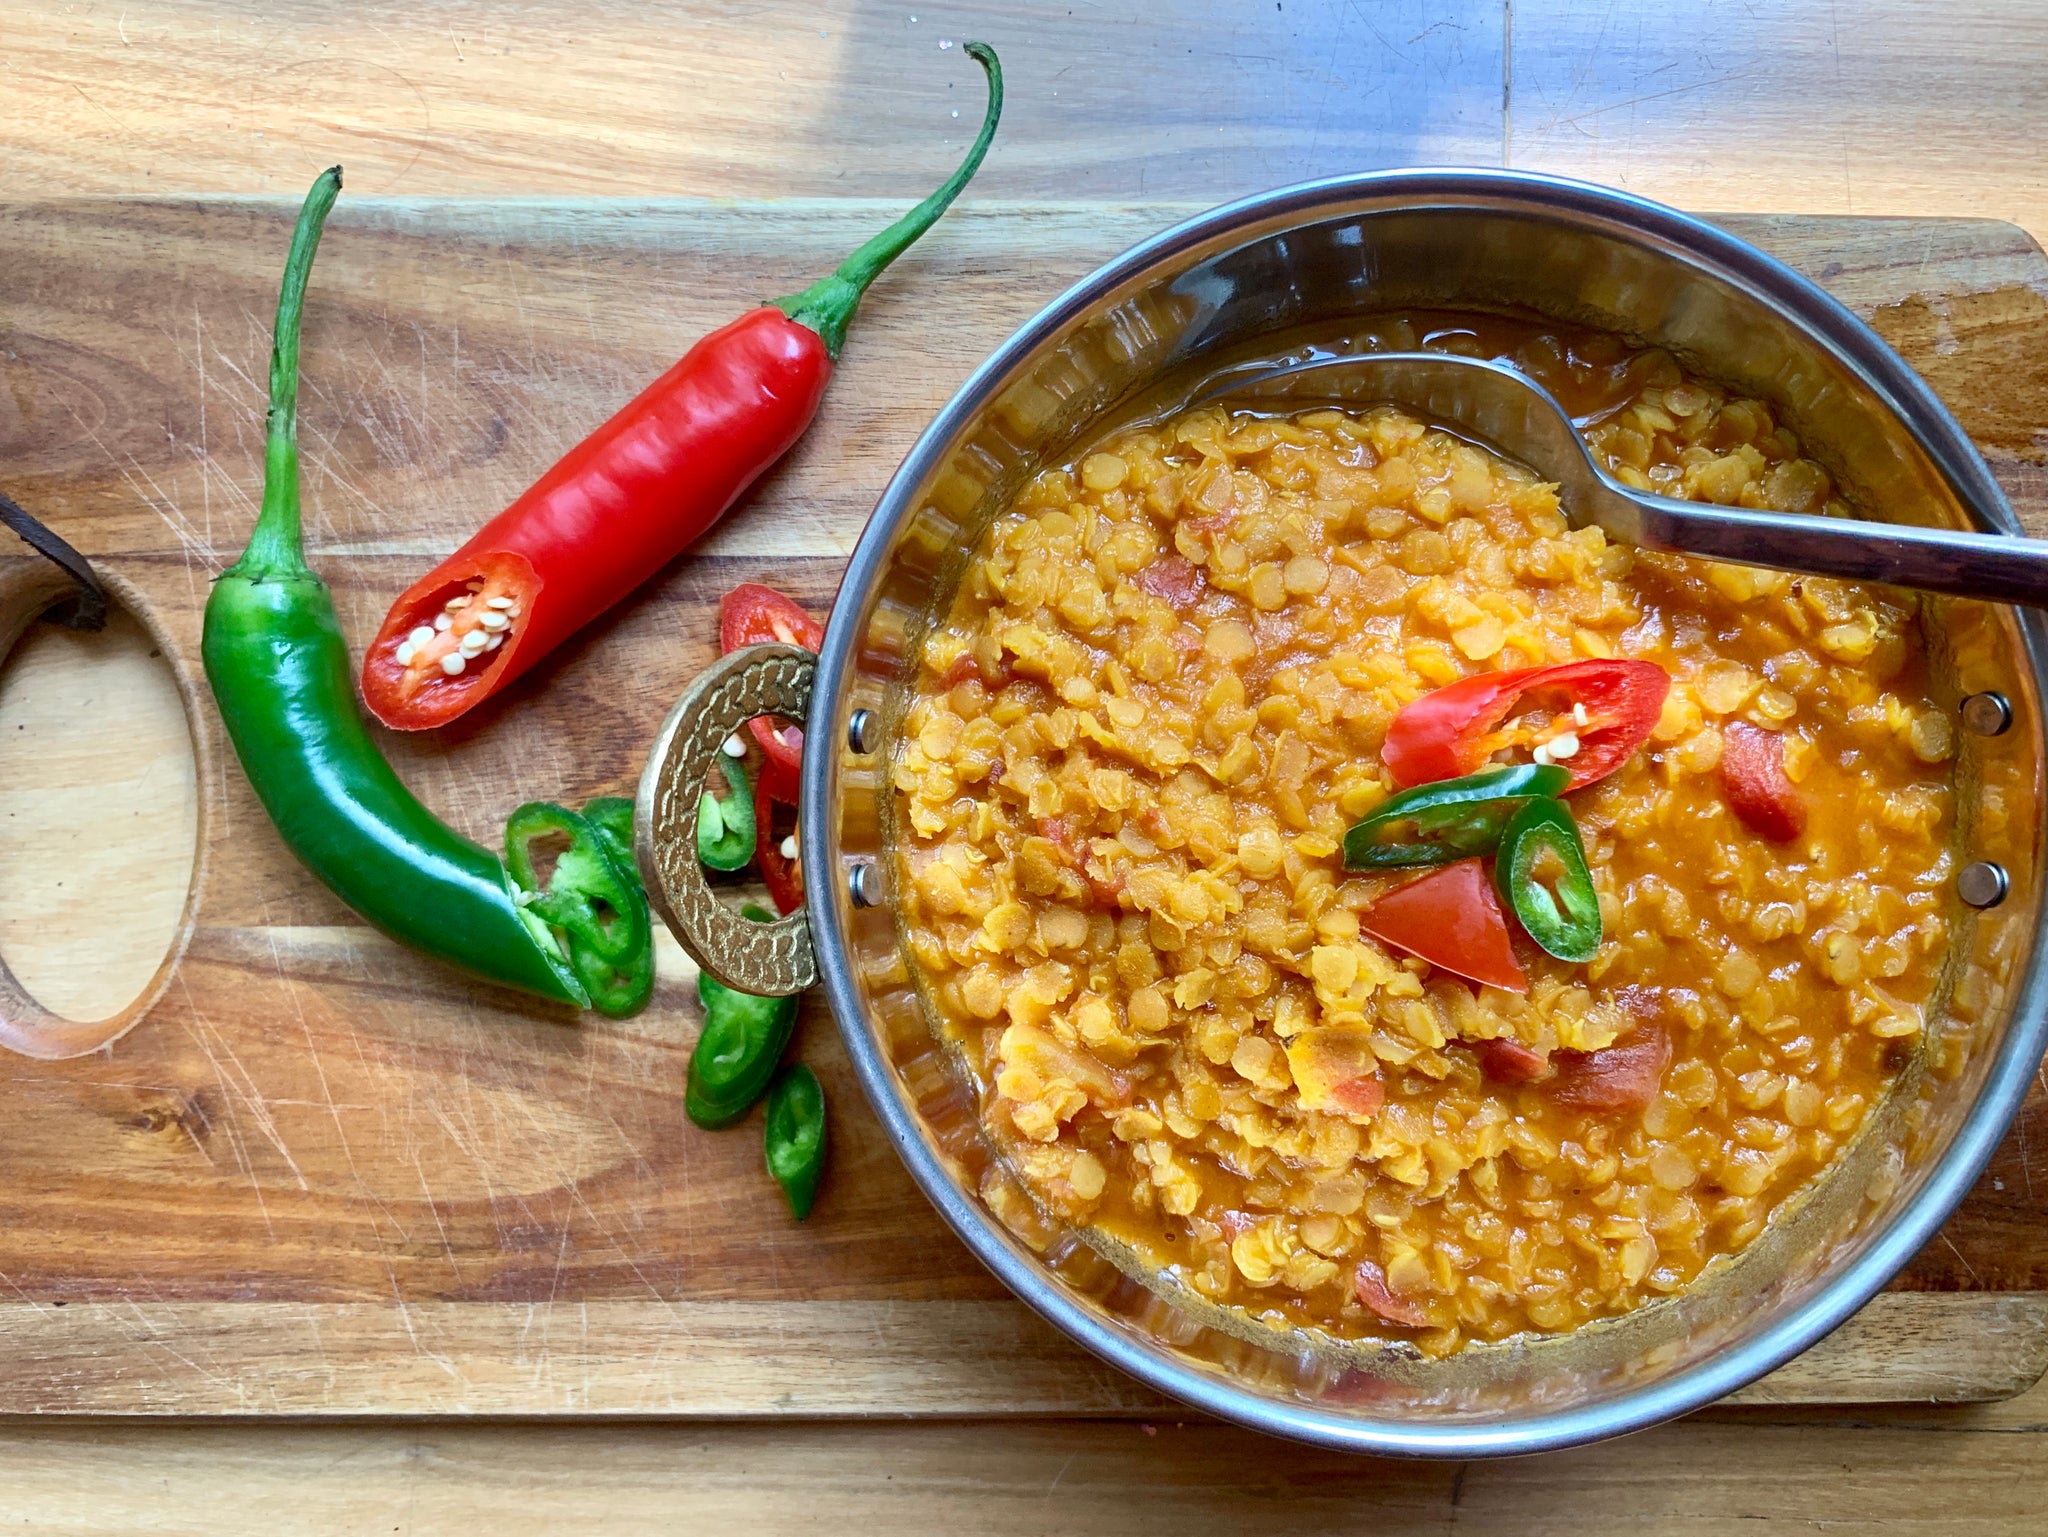 wholesome delicious and easy what more could you want best dhal in the world